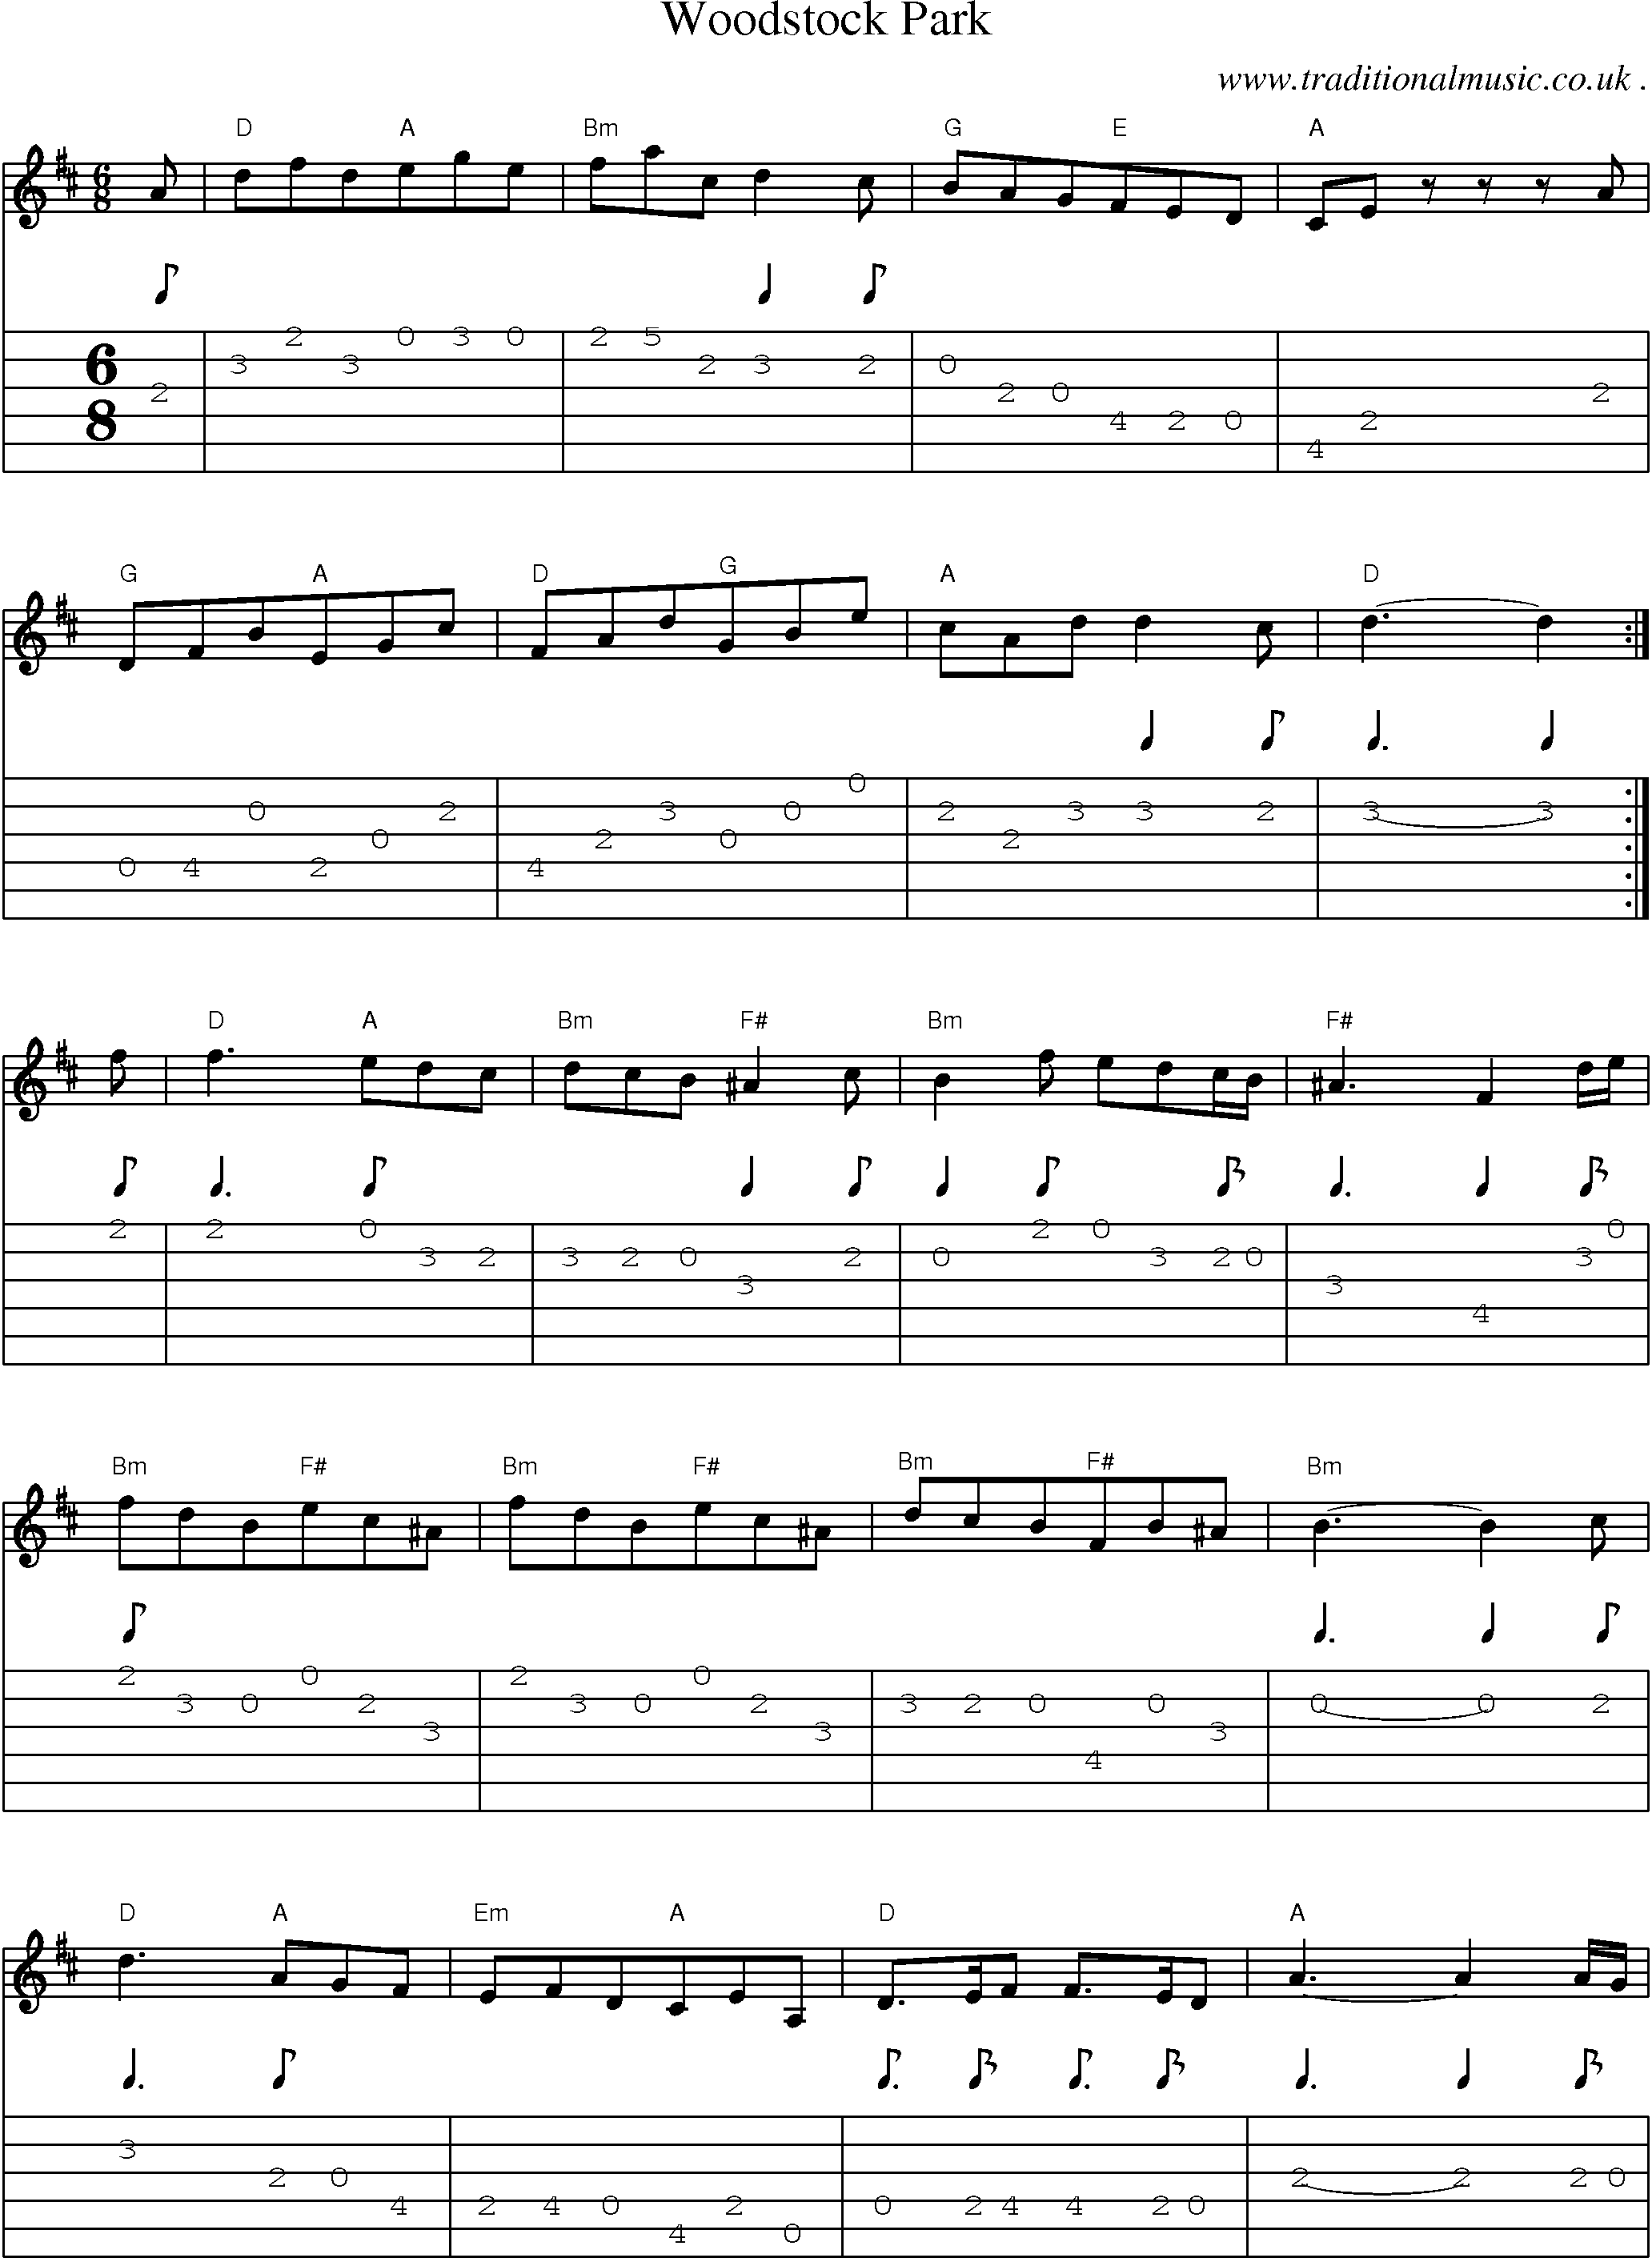 Sheet-Music and Guitar Tabs for Woodstock Park